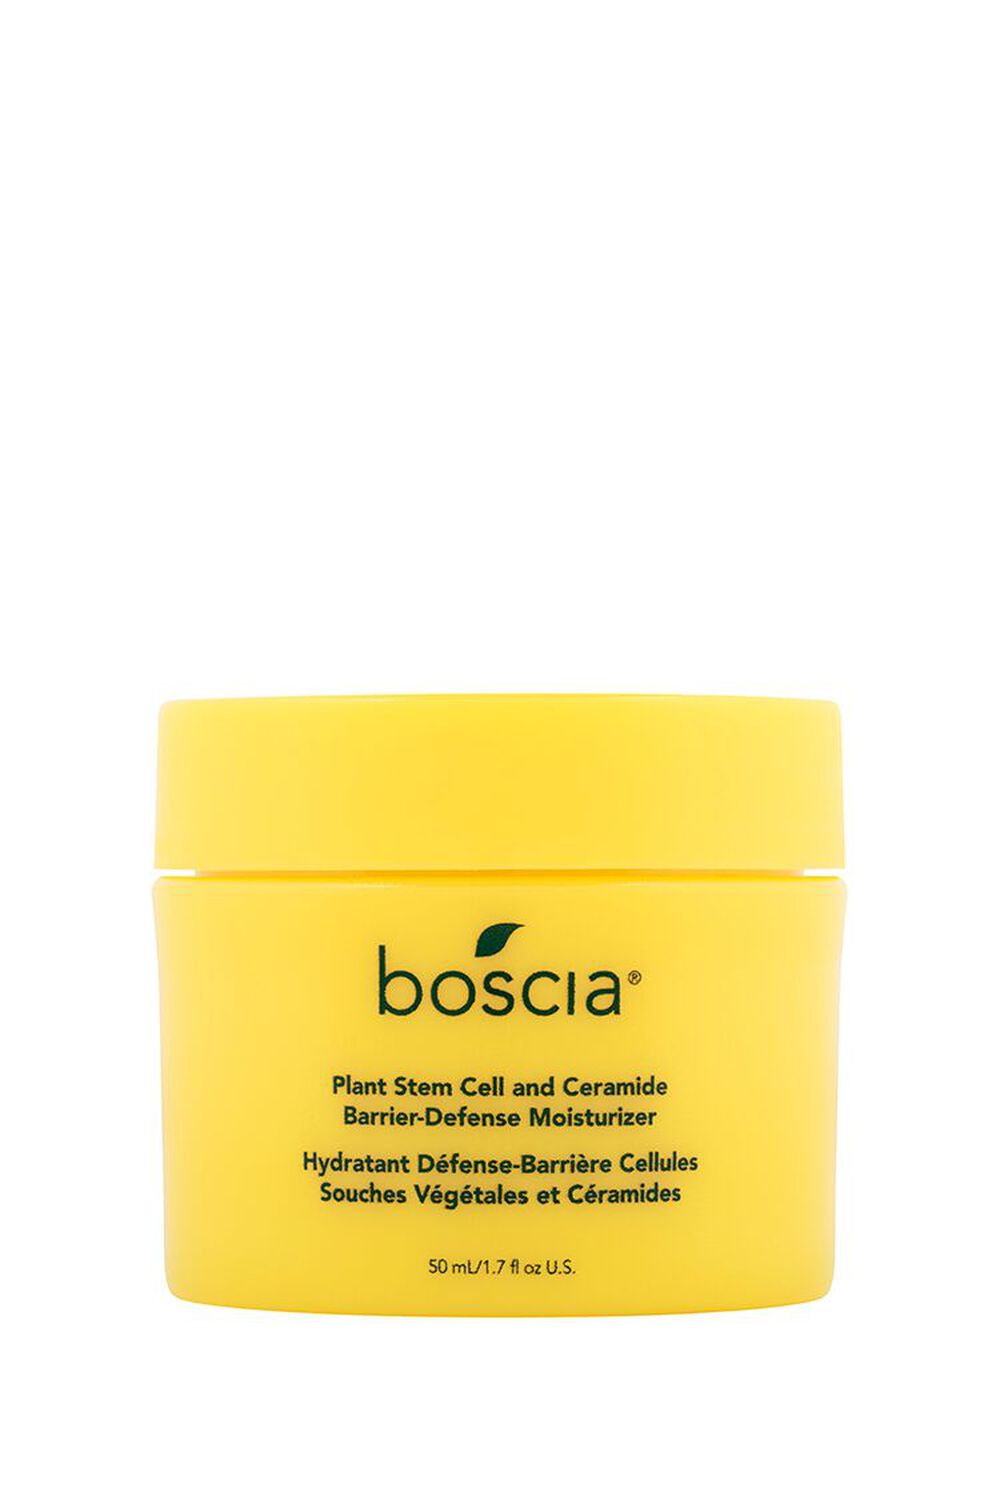 YELLOW boscia Plant Stem Cell and Ceramide Barrier-Defense Moisturizer, image 2